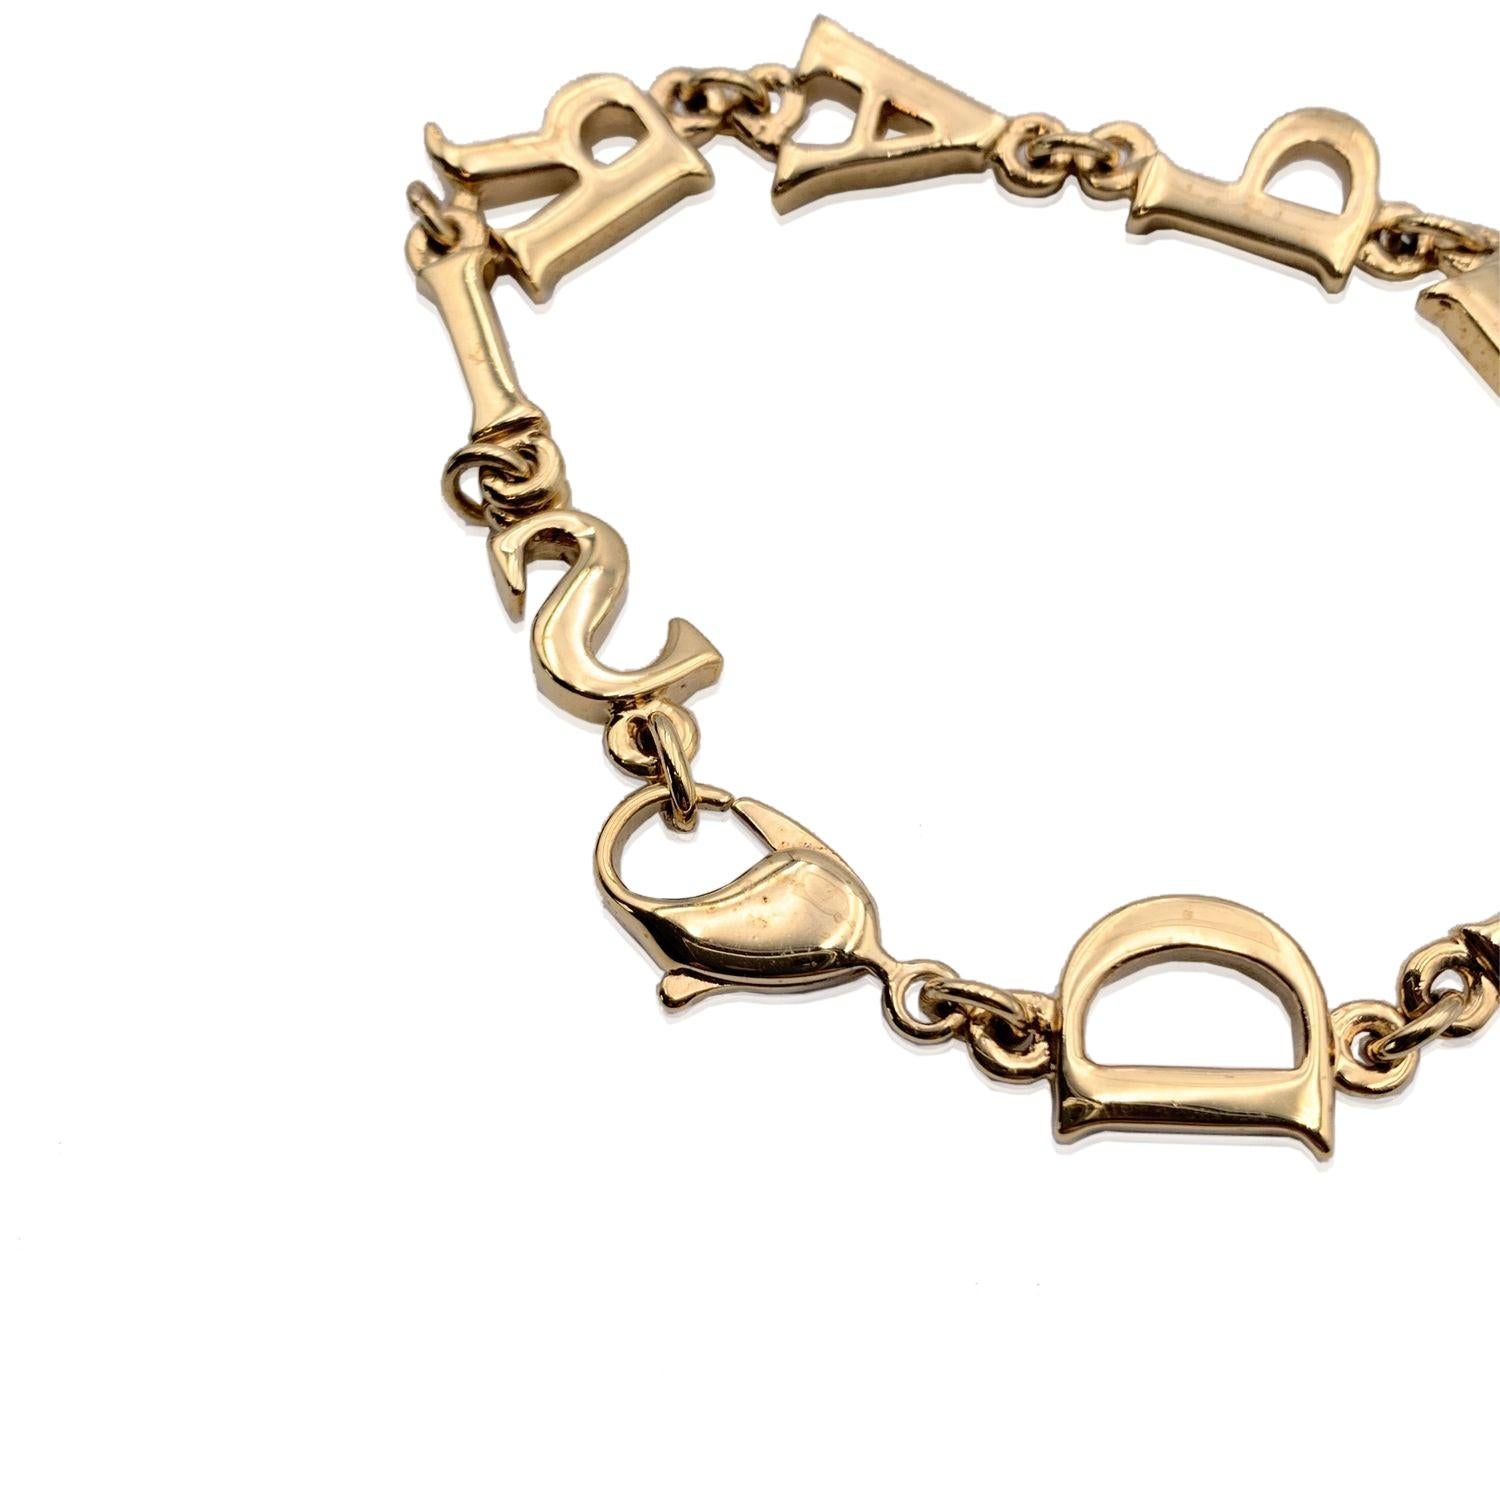 Gold plated metal articulated vintage bracelet by CHRISTIAN DIOR. 'D.I.O.R. P.A.R.I.S' letters initials links. Lobster closure. Internal circumference: 7 inches - 17.8 cm. Condition A - EXCELLENT Gently used. Please check pictures carefully and ask